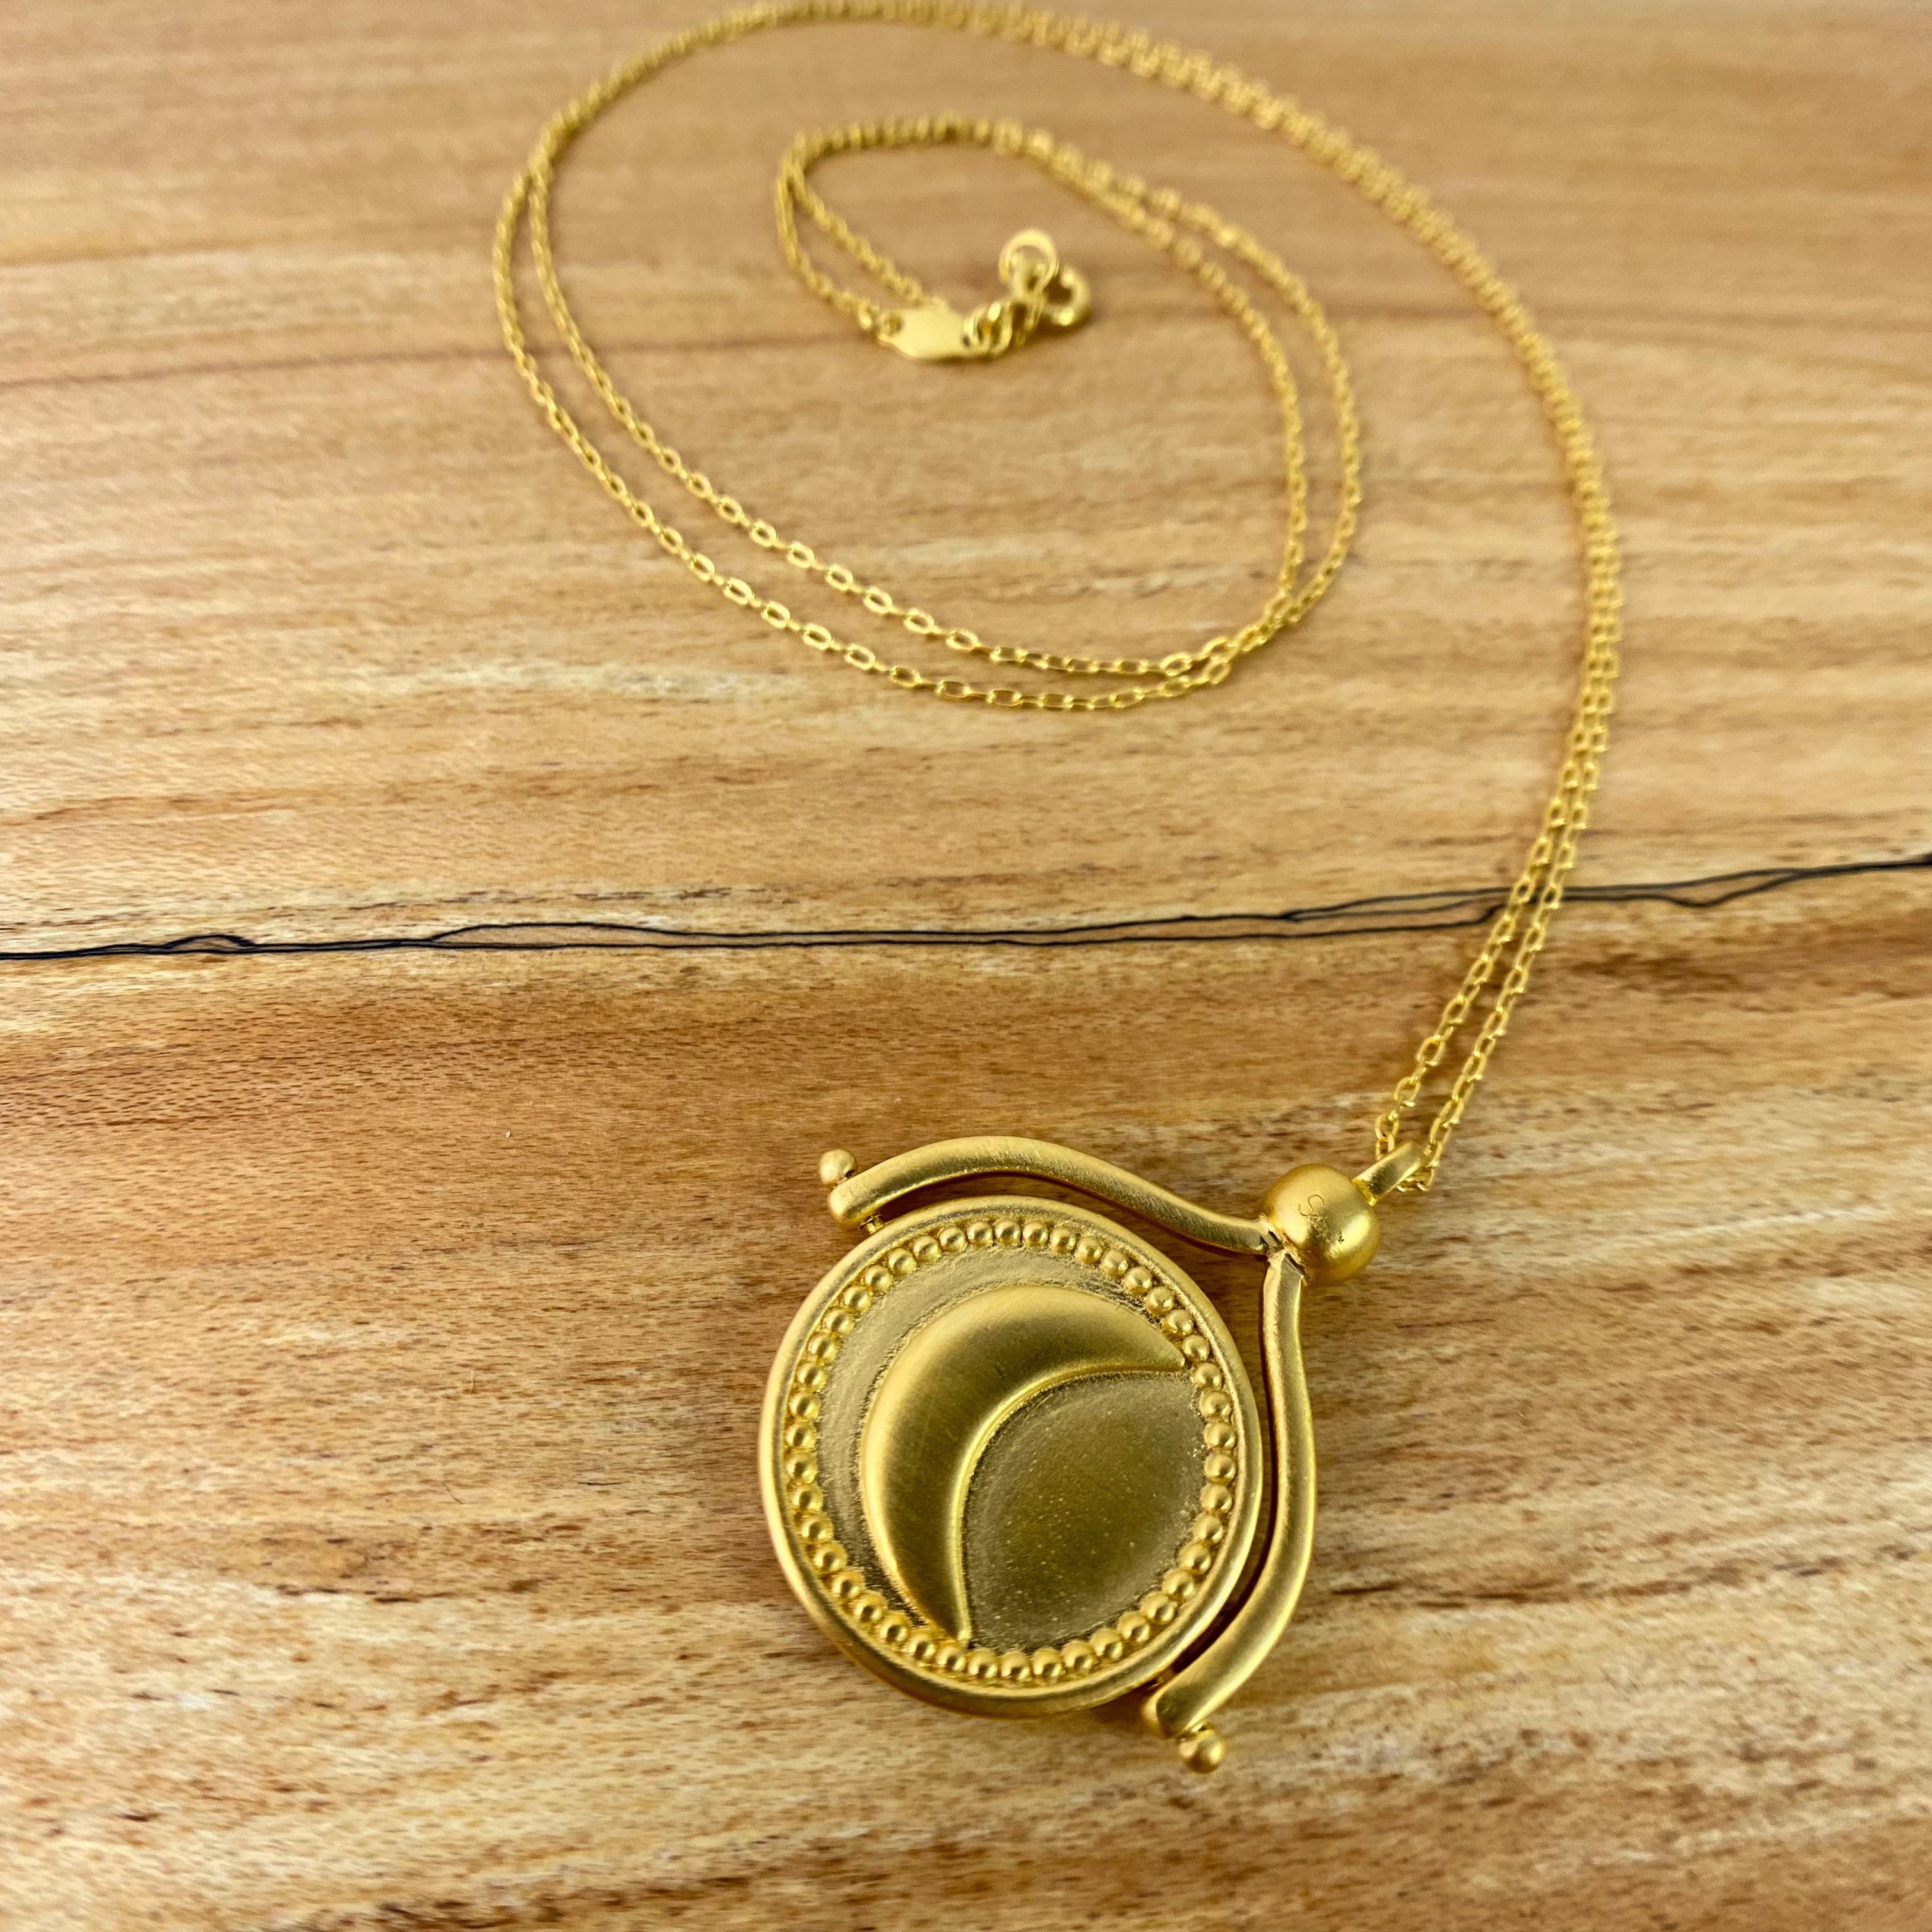 "Make A Wish" Spinning Sun and Moon Necklace by Satya Jewelry